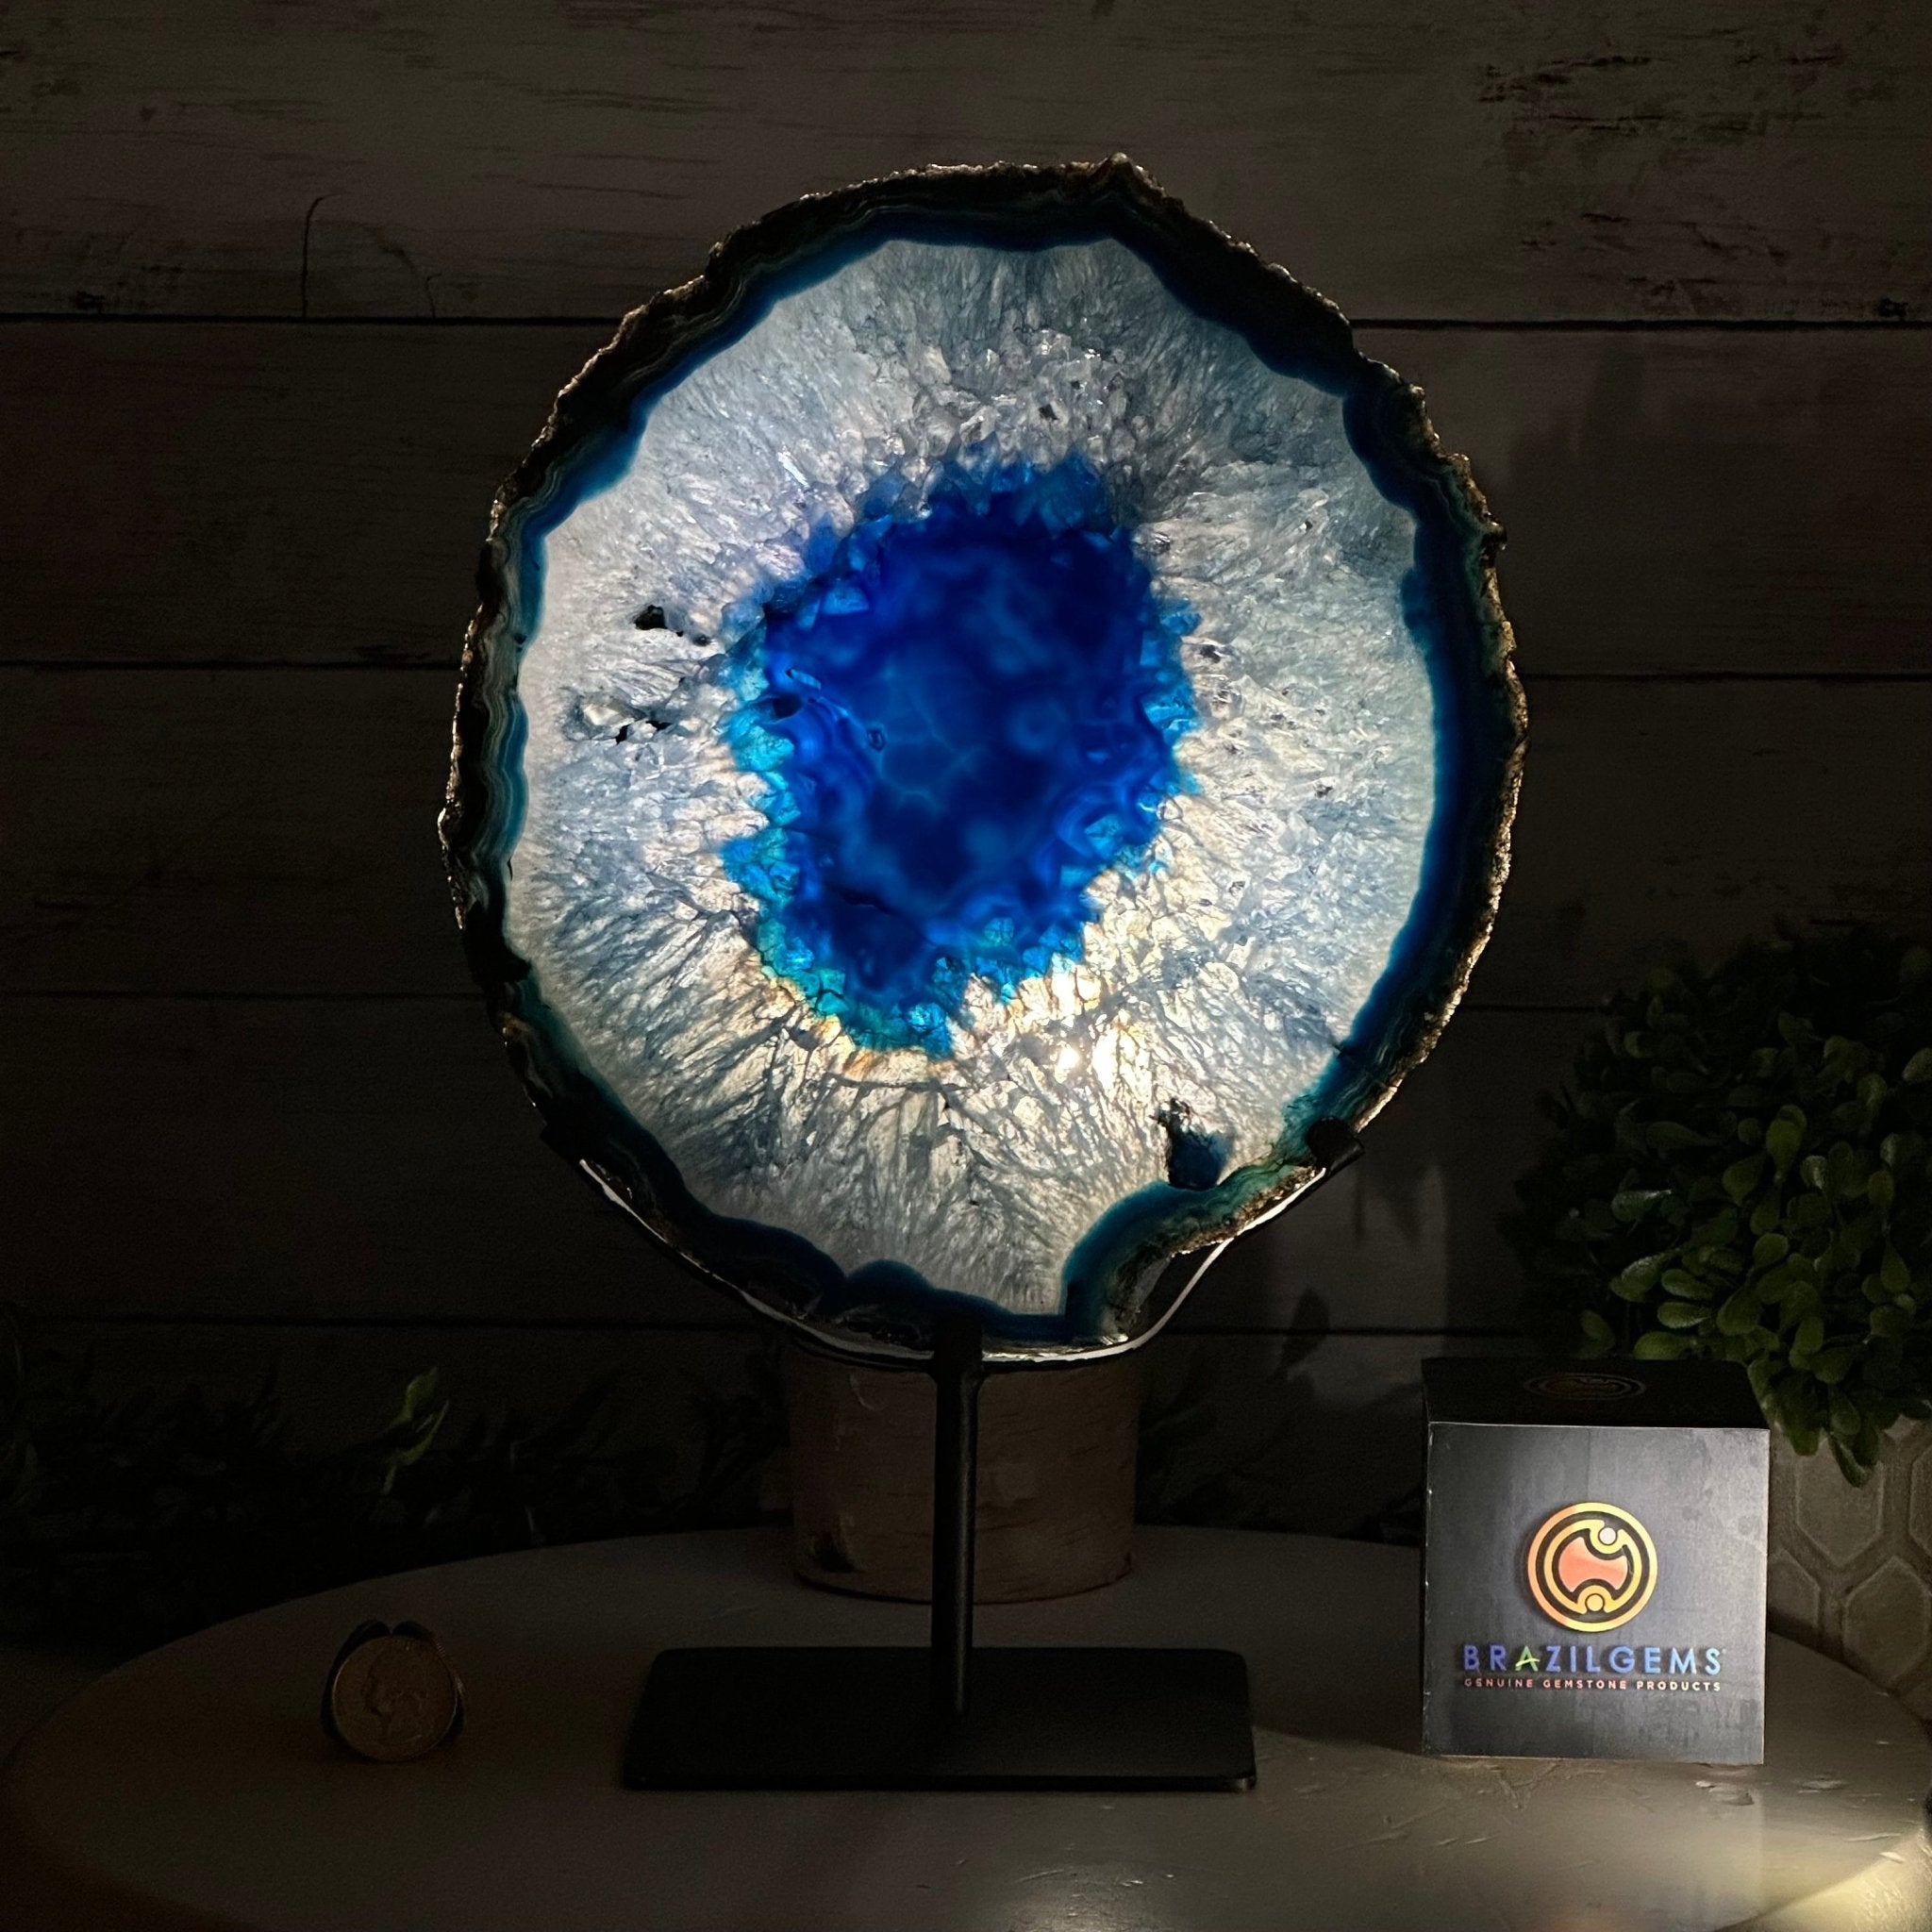 Brazilian Blue Agate Slice on a Metal Stand, 12" Tall #5055-0137 - Brazil GemsBrazil GemsBrazilian Blue Agate Slice on a Metal Stand, 12" Tall #5055-0137Slices on Fixed Bases5055-0137